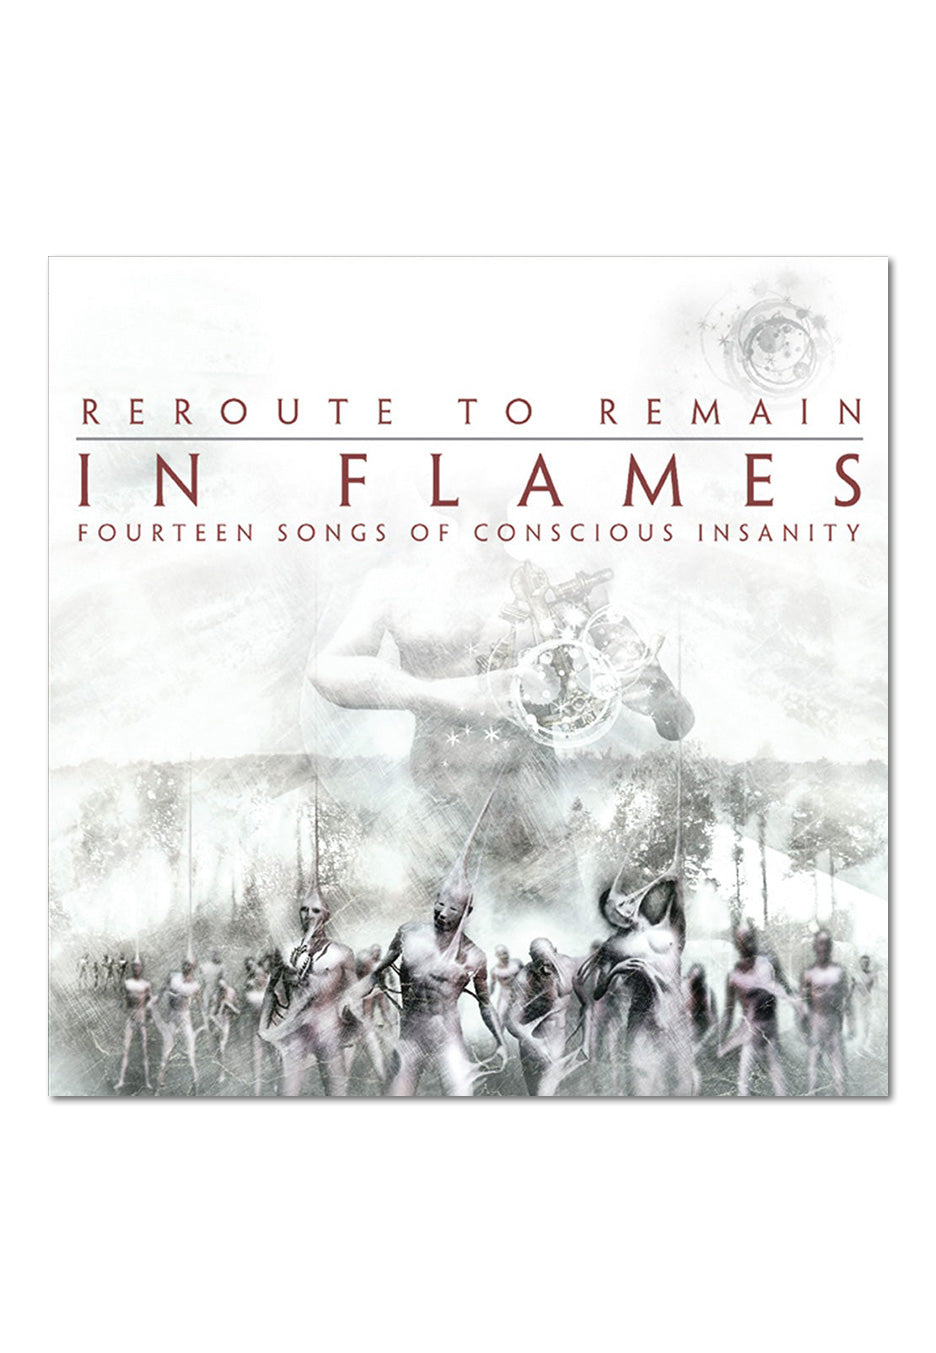 In Flames - Reroute To Remain - CD